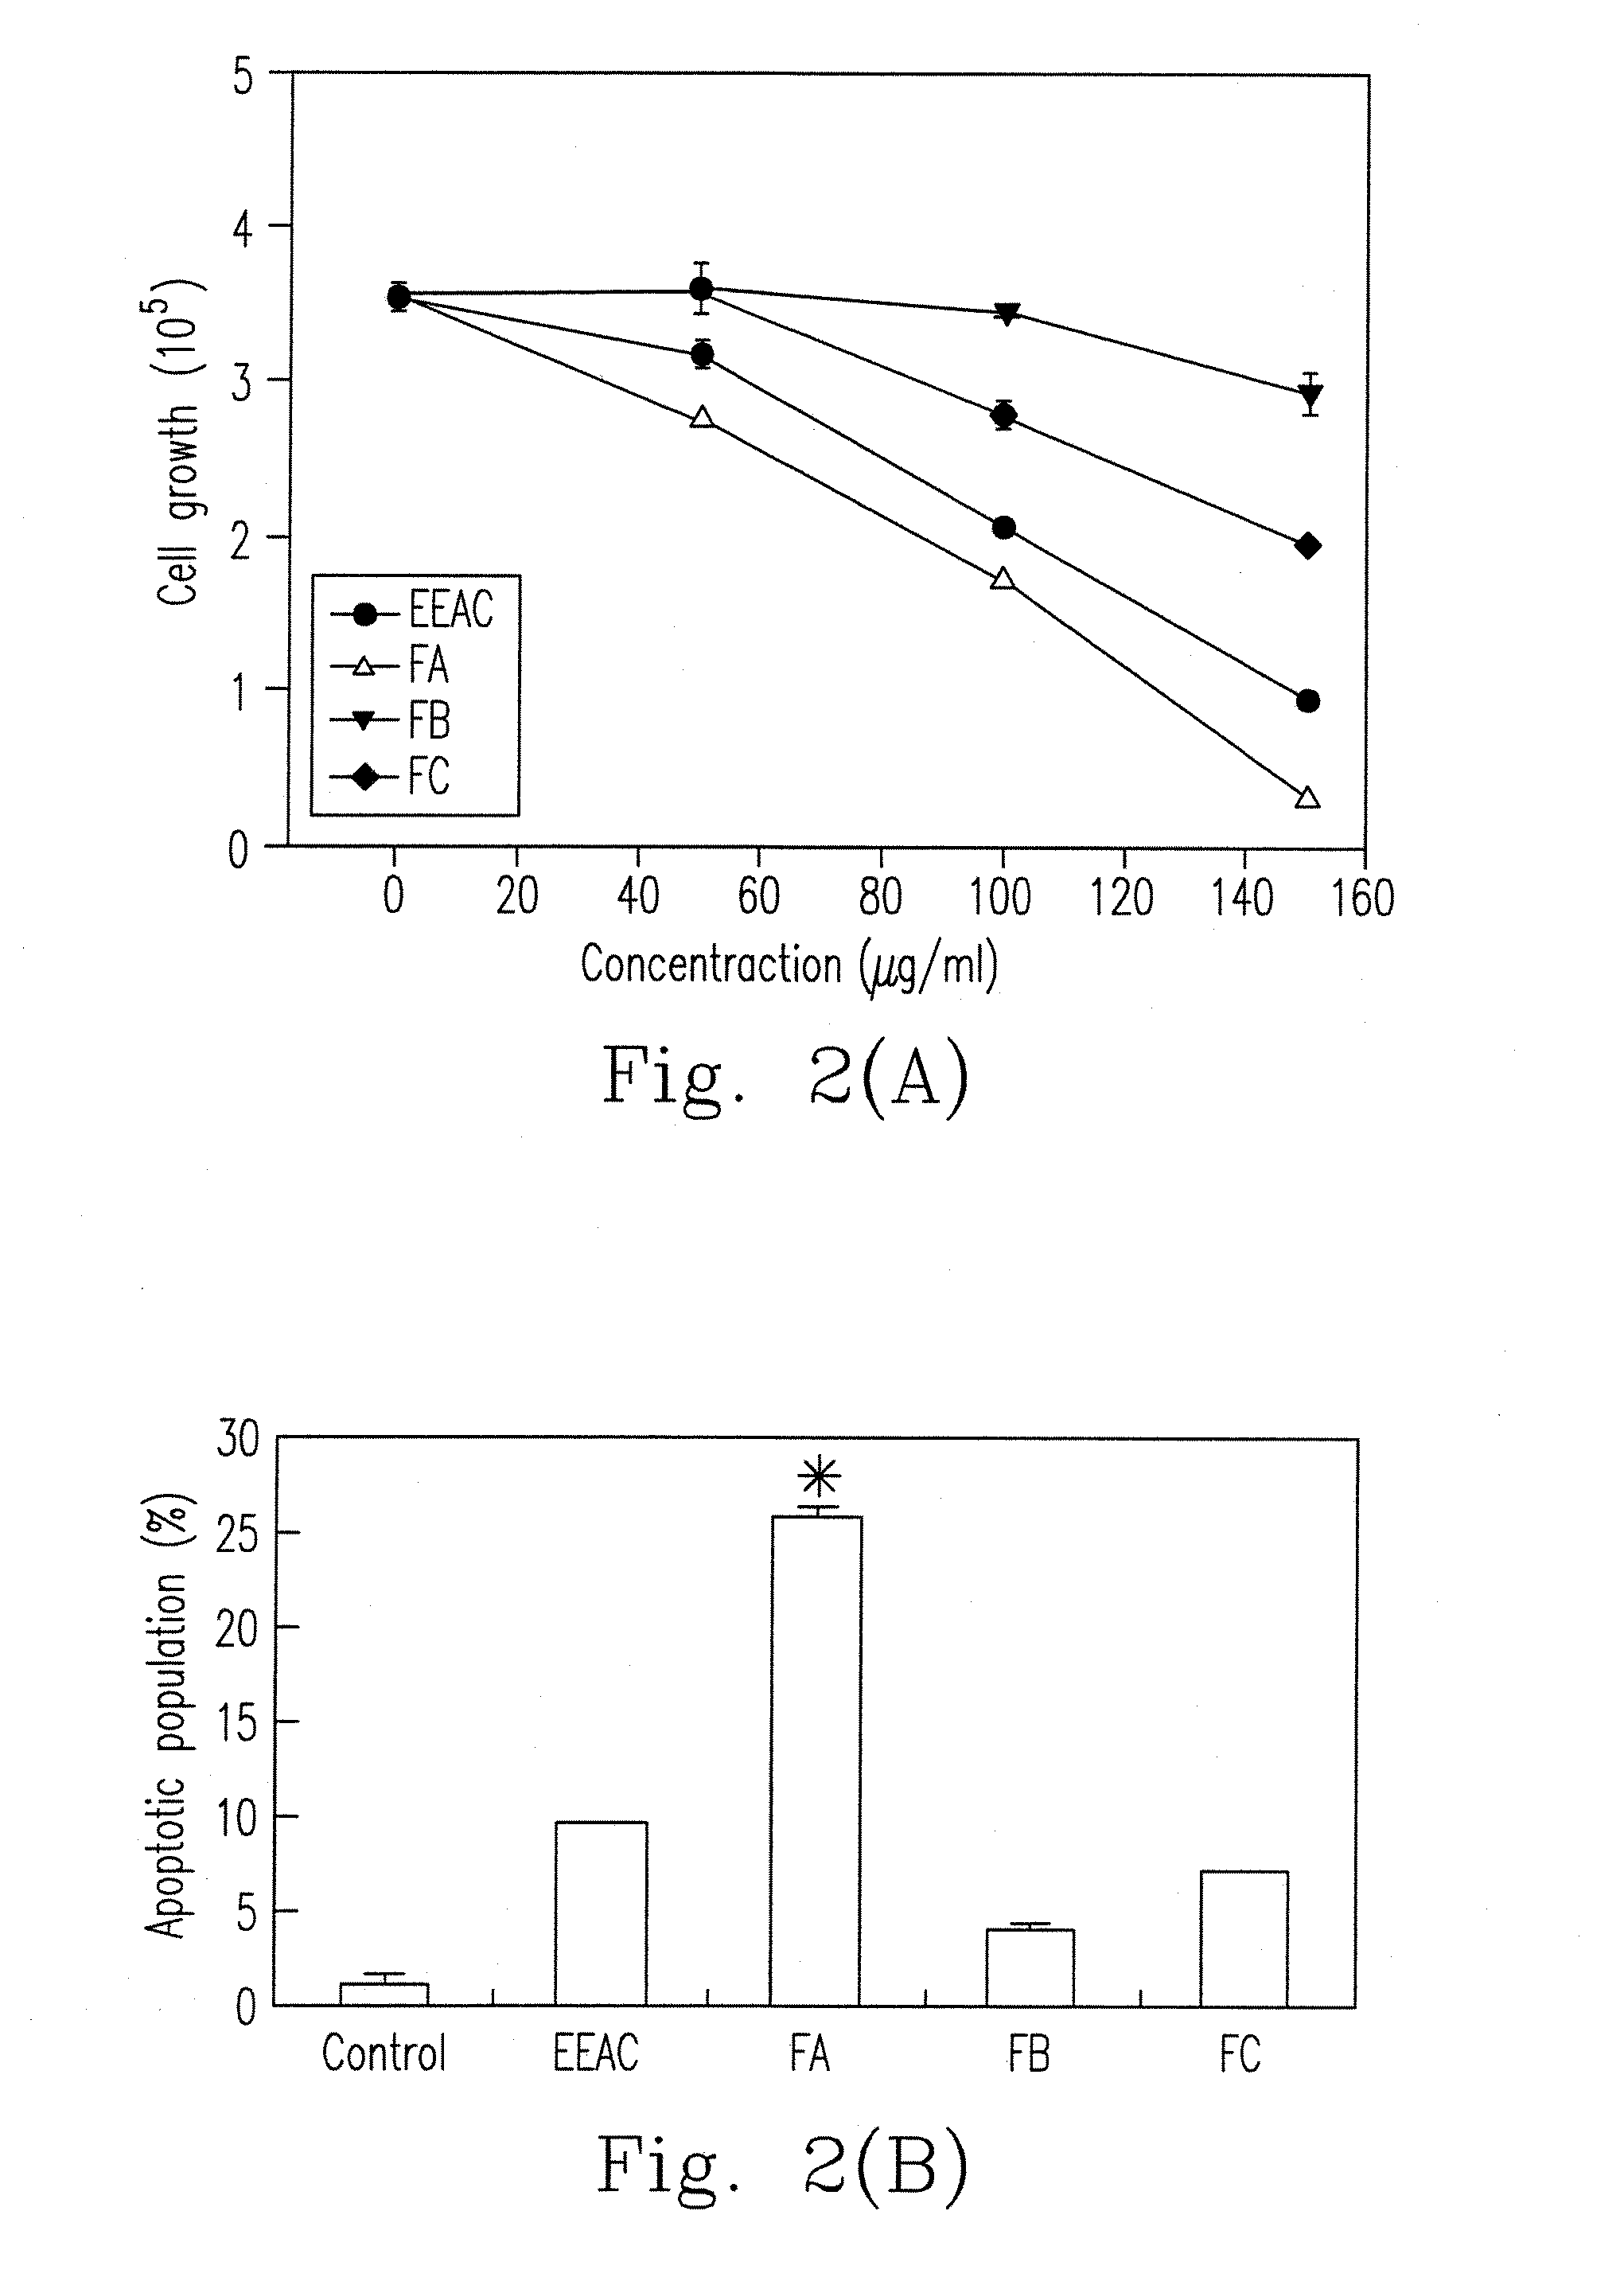 Ethanol extract of antrodia camphorata for inducing apoptosis and preparation method thereof